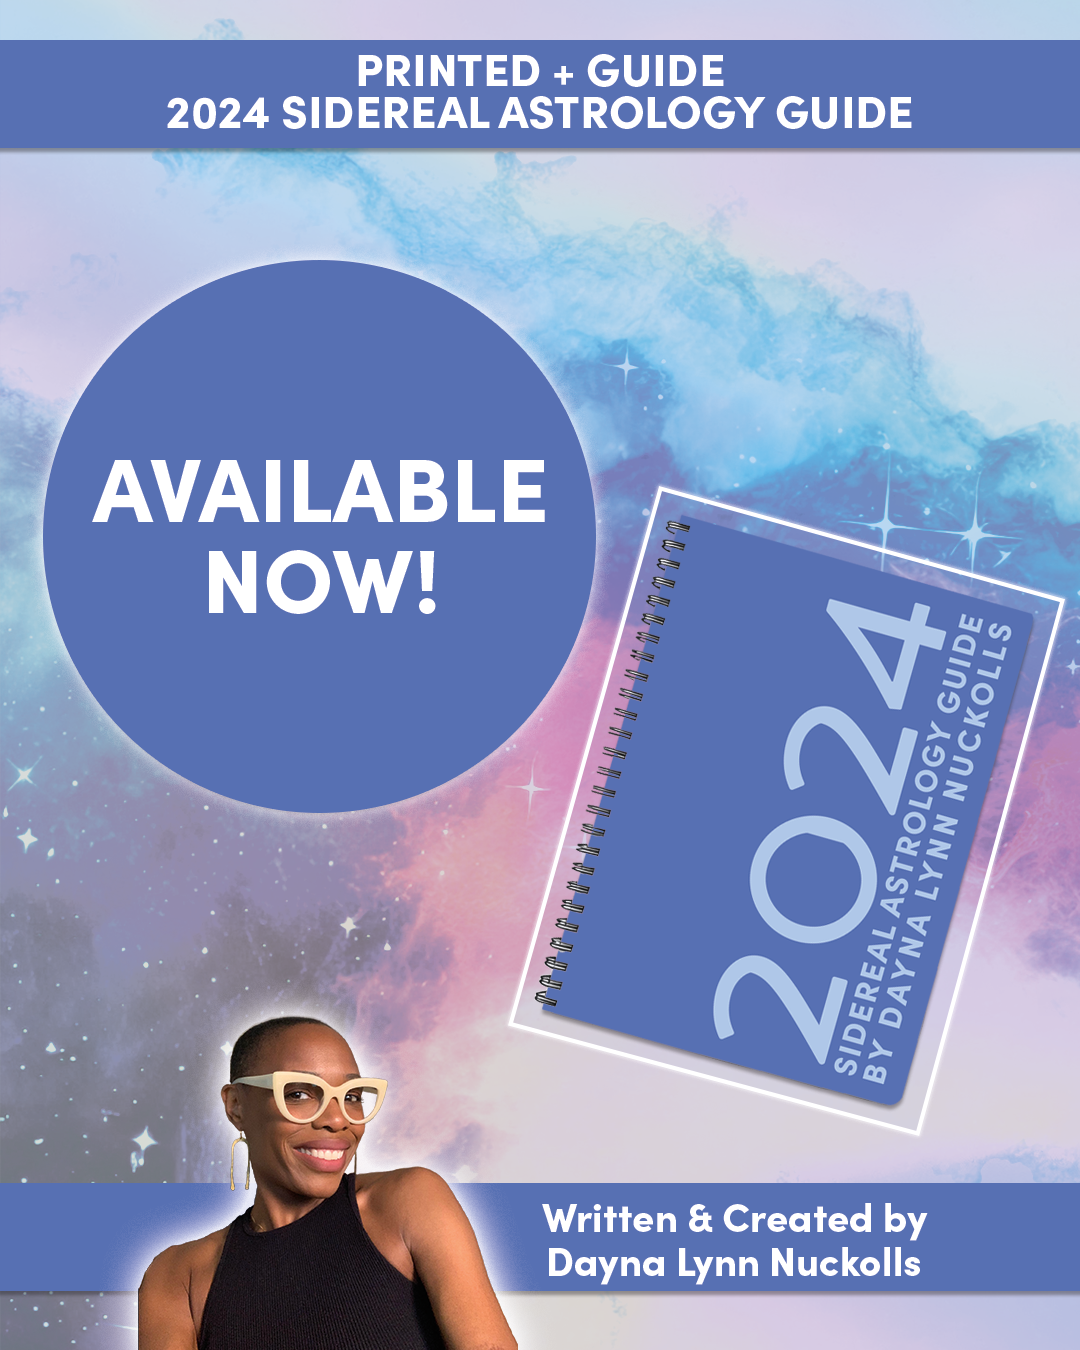 Printed + Bound 2024 Sidereal Astrology Calendar and Workbook. Written and Created by Dayna Lynn Nuckolls. 2024 Sidereal Astrology Guide. A 2024 Horoscope.